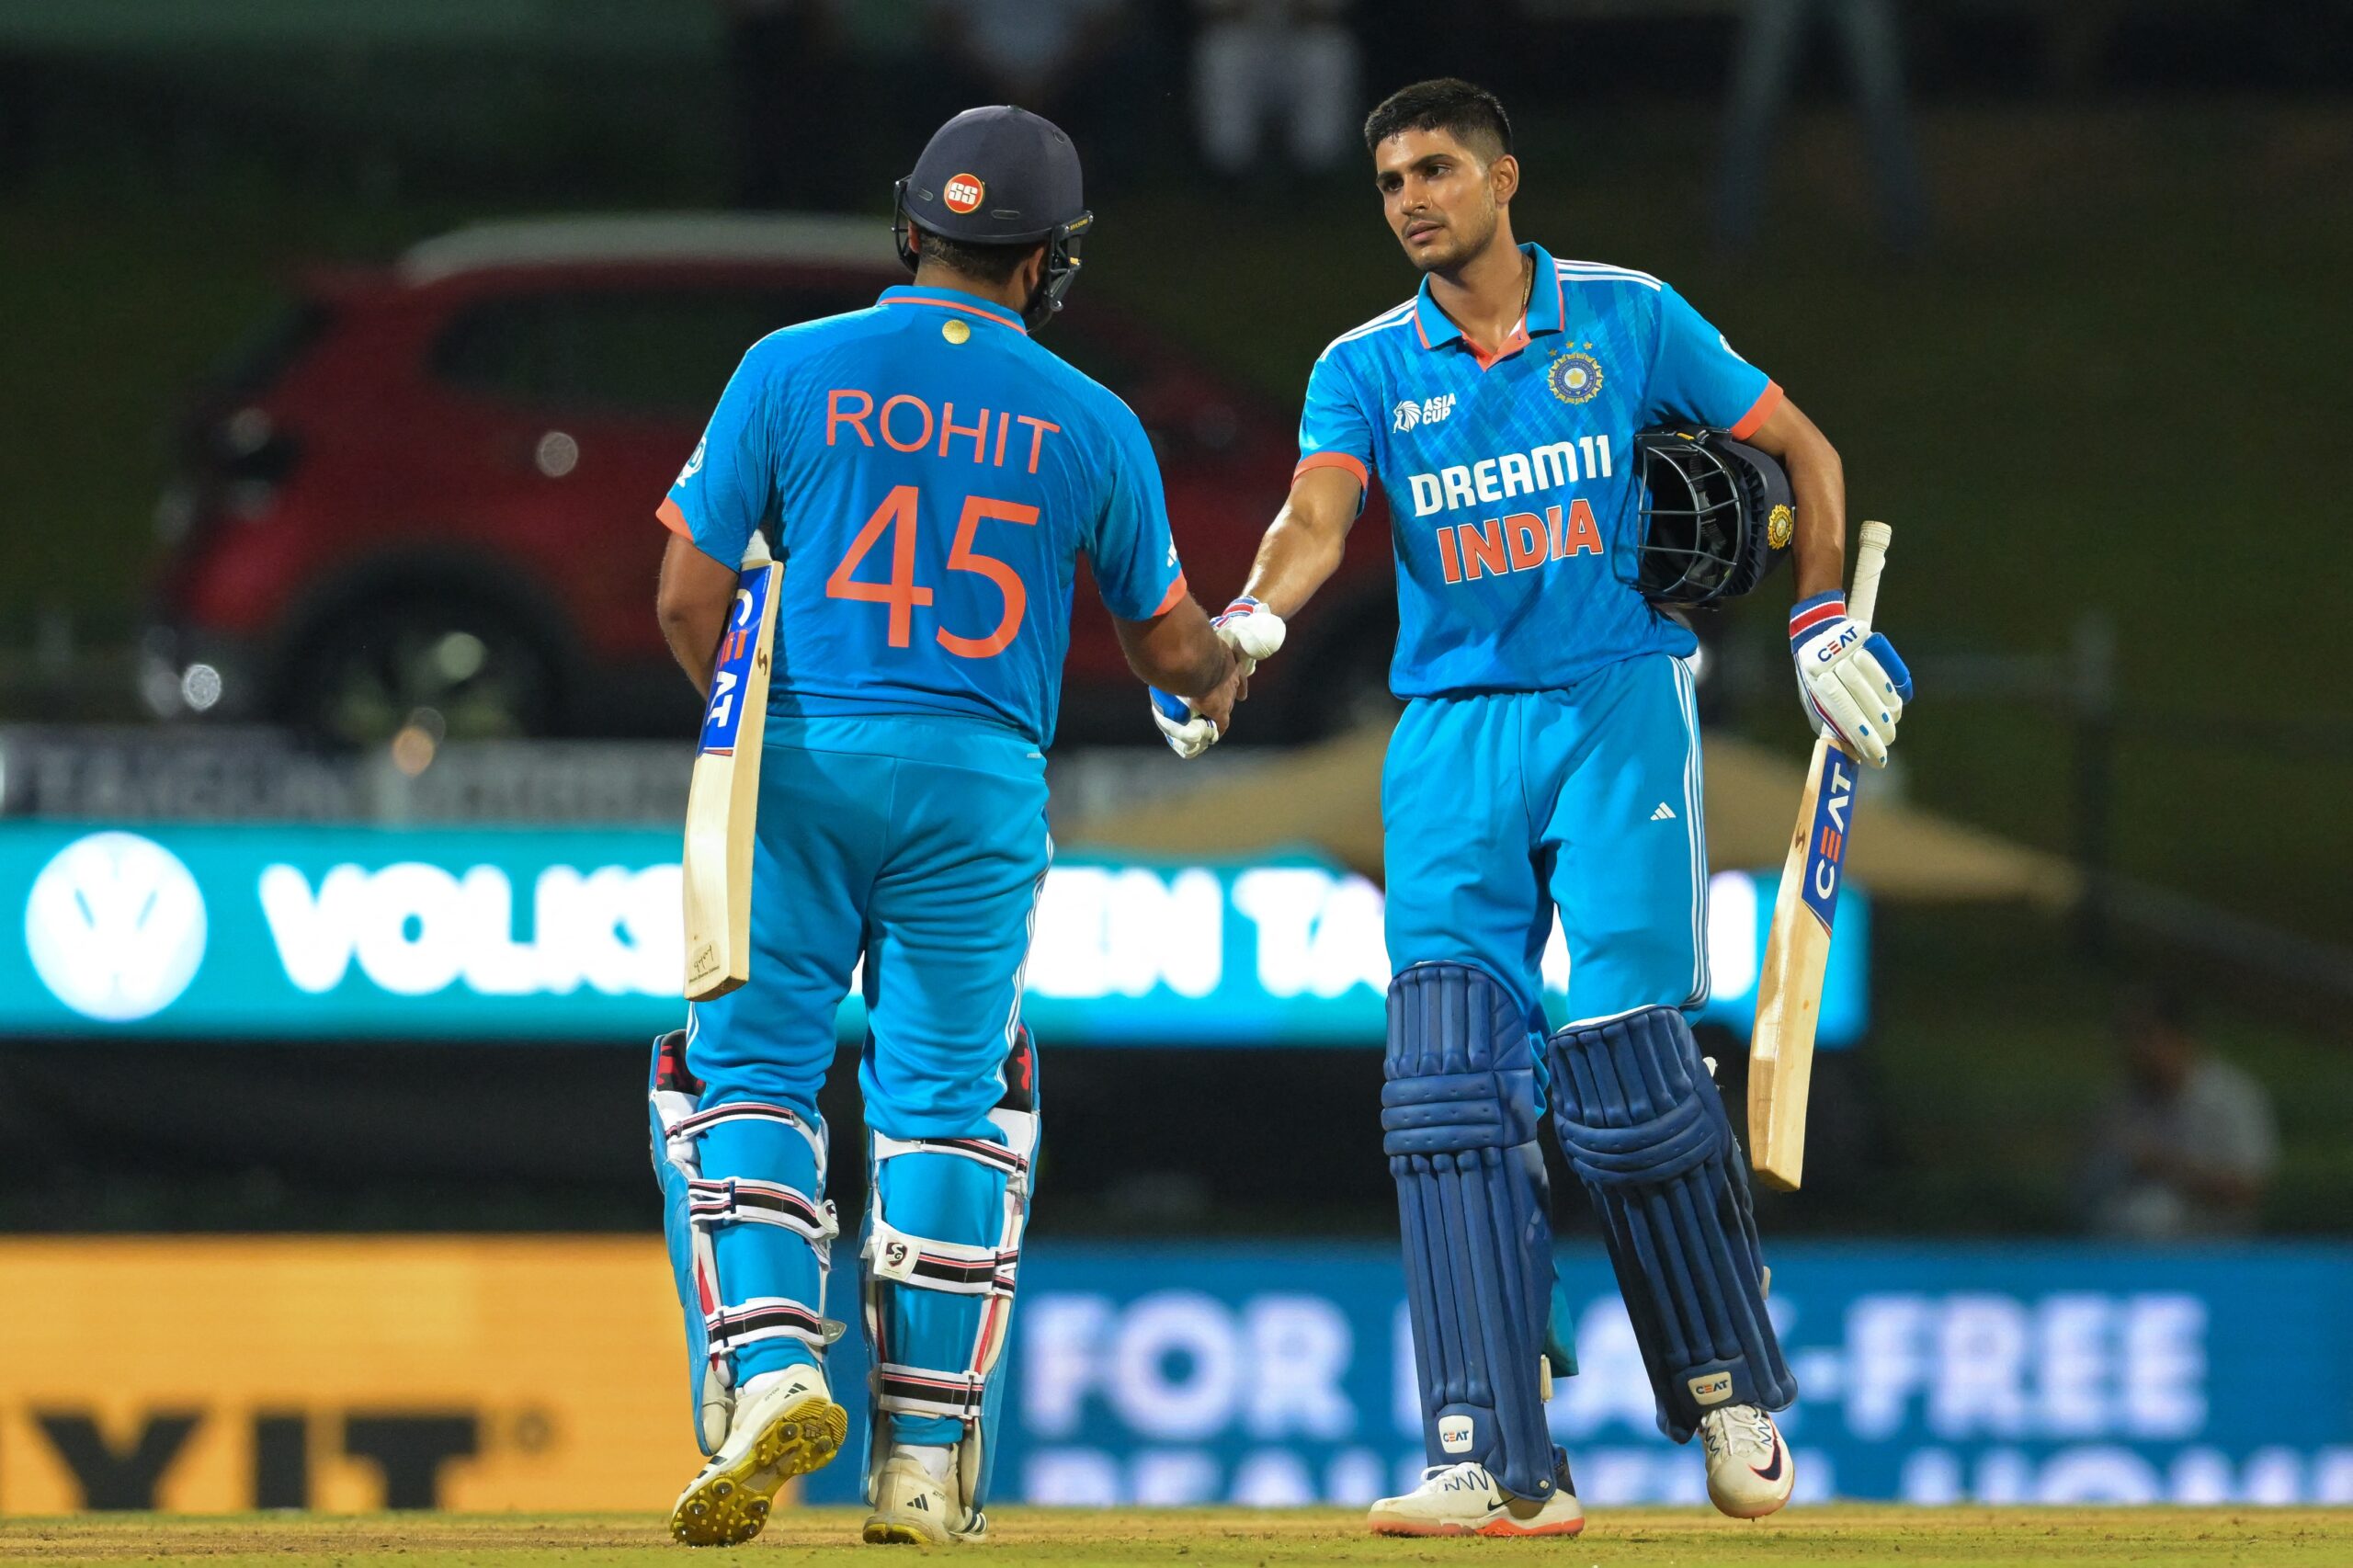 Asia Cup 2023: Shubman Gill, Rohit Sharma Shine As India Beat Nepal To Seal Super 4 Berth